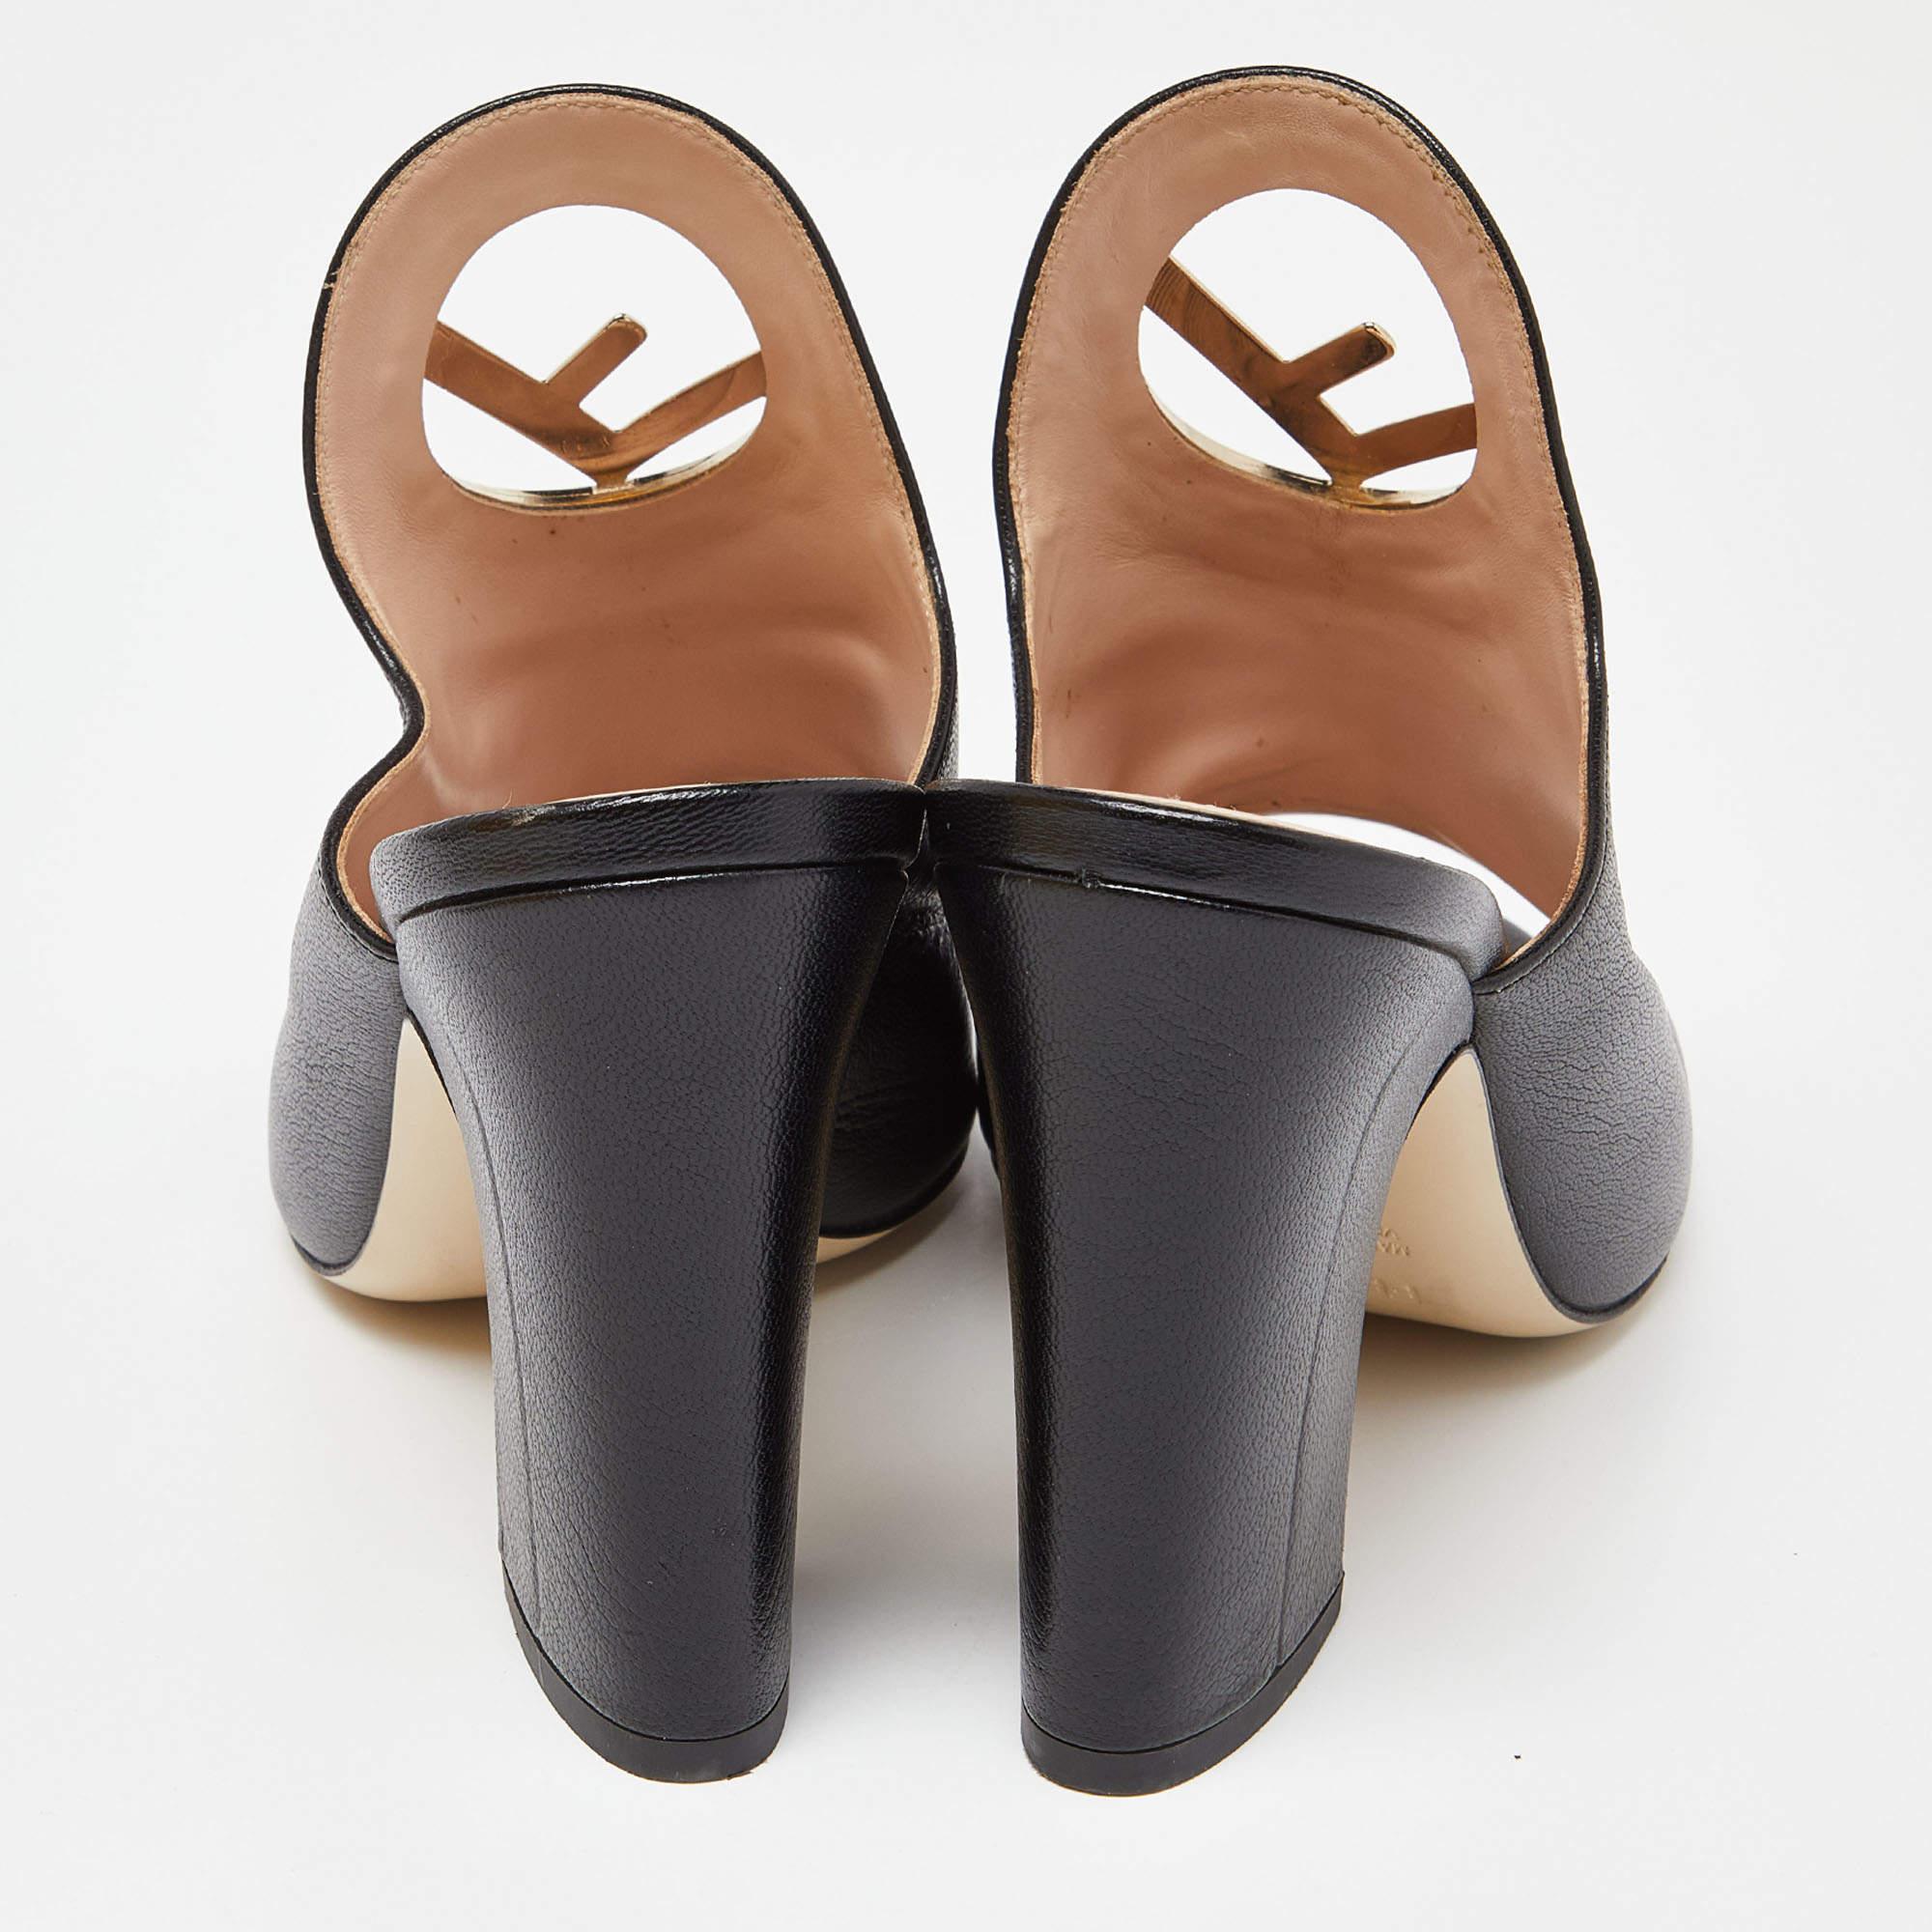 A perfect blend of luxury, style, and comfort, these designer mules are made using quality materials and frame your feet in the most elegant way. They can be paired with a host of outfits from your wardrobe.

Includes: Original Dustbag, Original Box